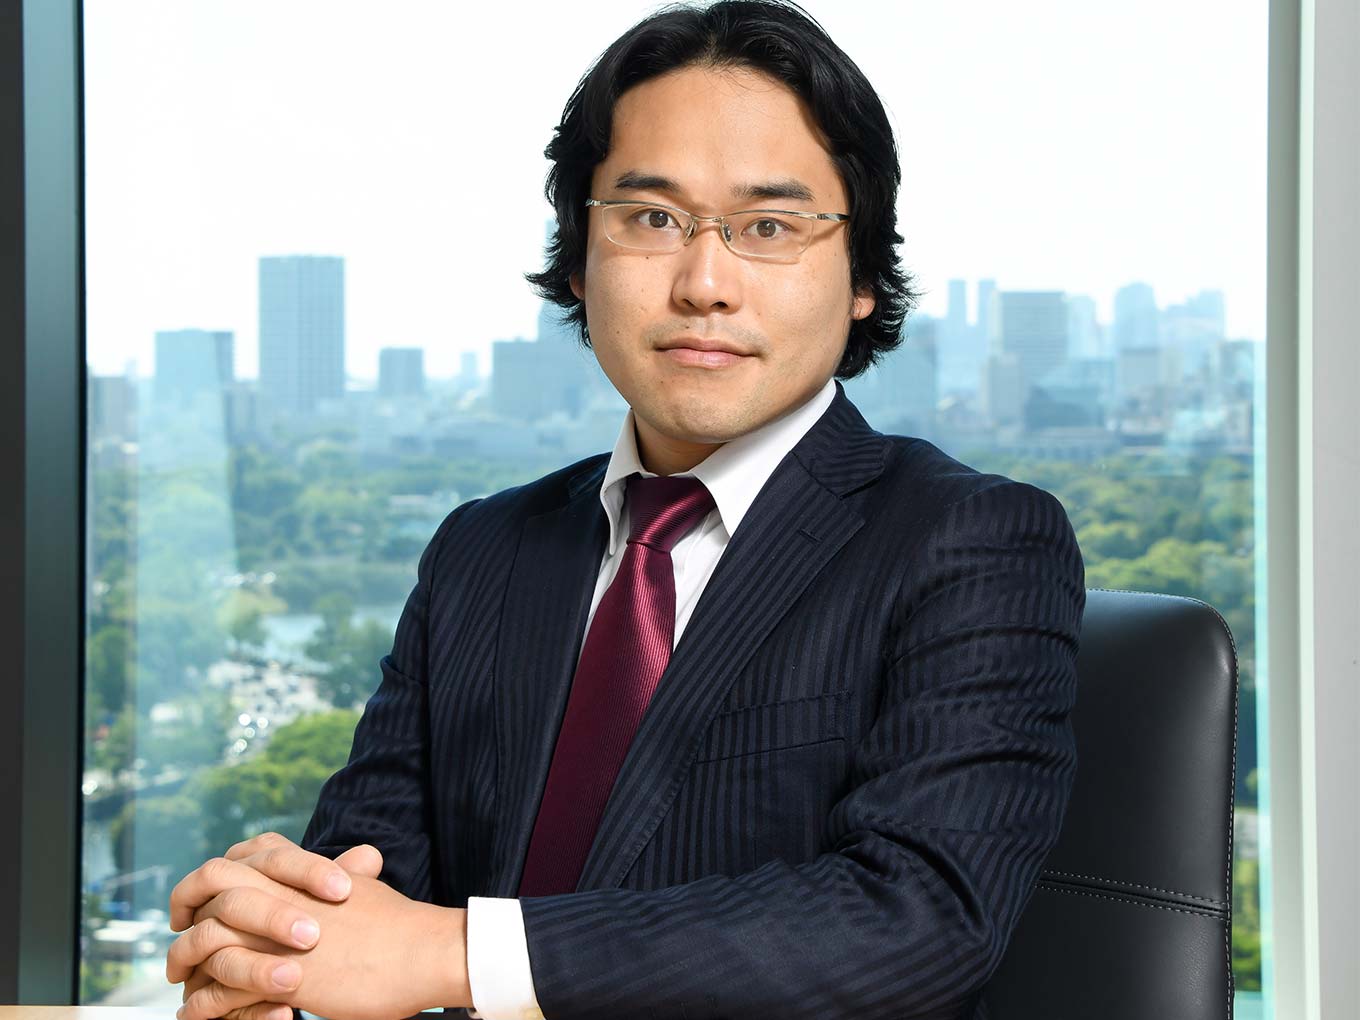 Deloitte Tohmatsu Venture Support MD Yuma Saito On Why Japanese Investors Need To Focus On Indian Startups